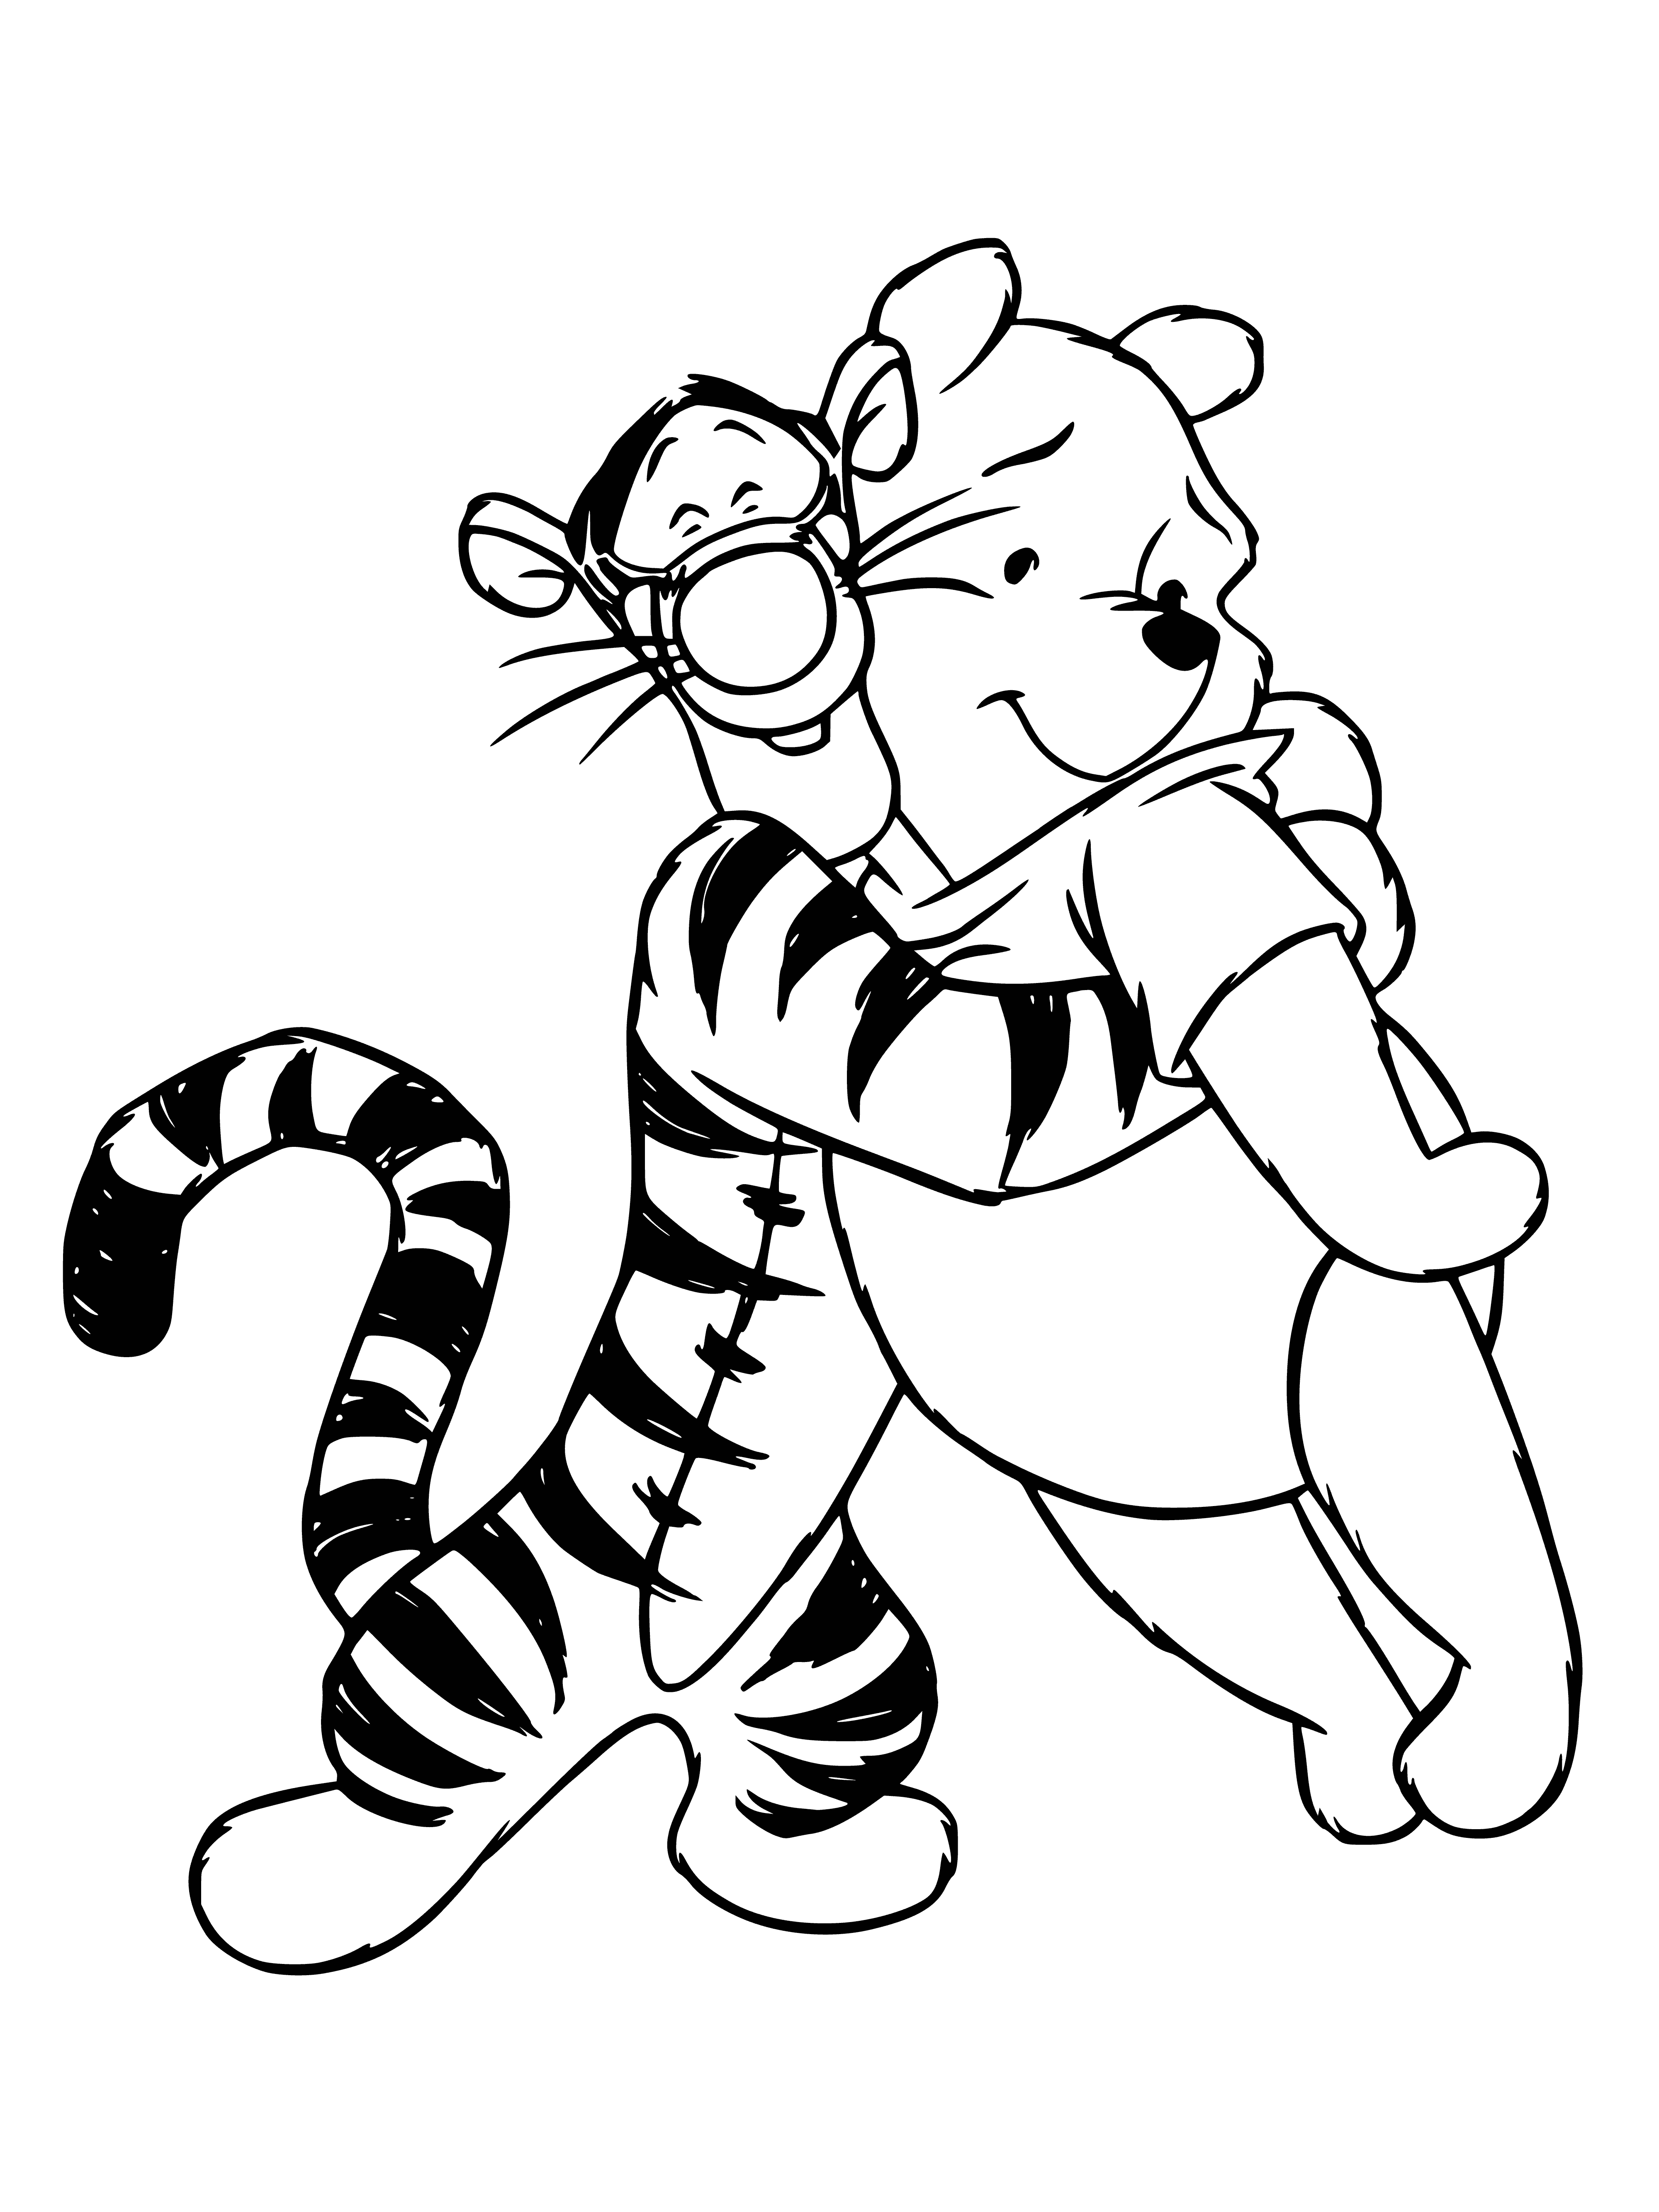 coloring page: Tigger & Pooh happily hug, smiles on their faces!